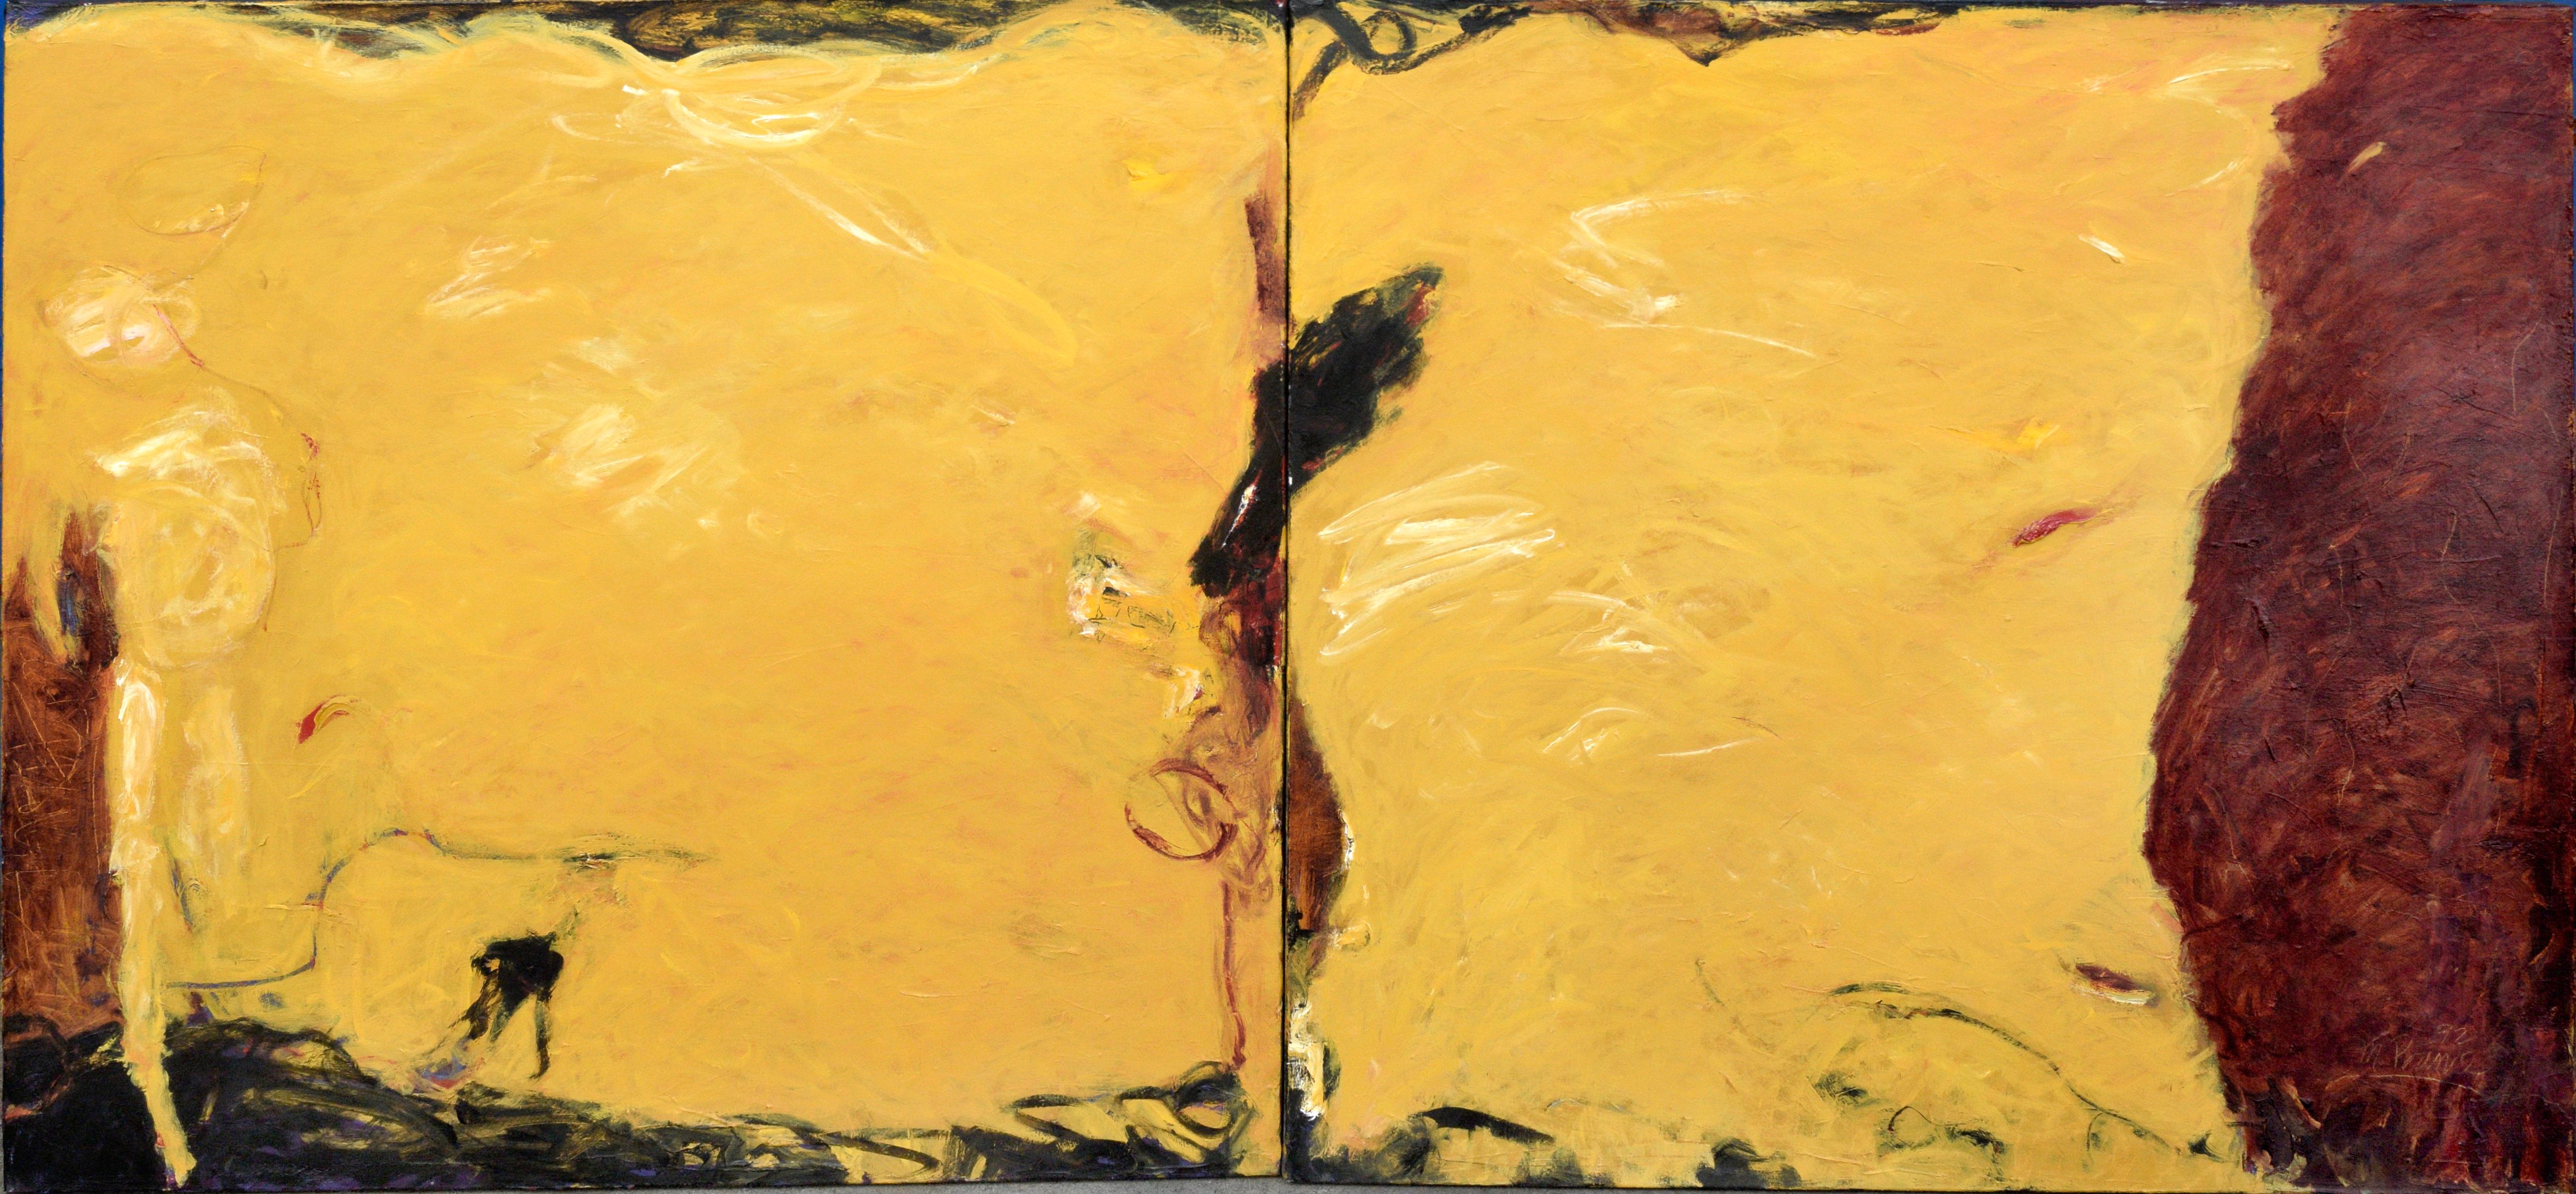 Abstract Beach Diptych  - Painting by M. Prince